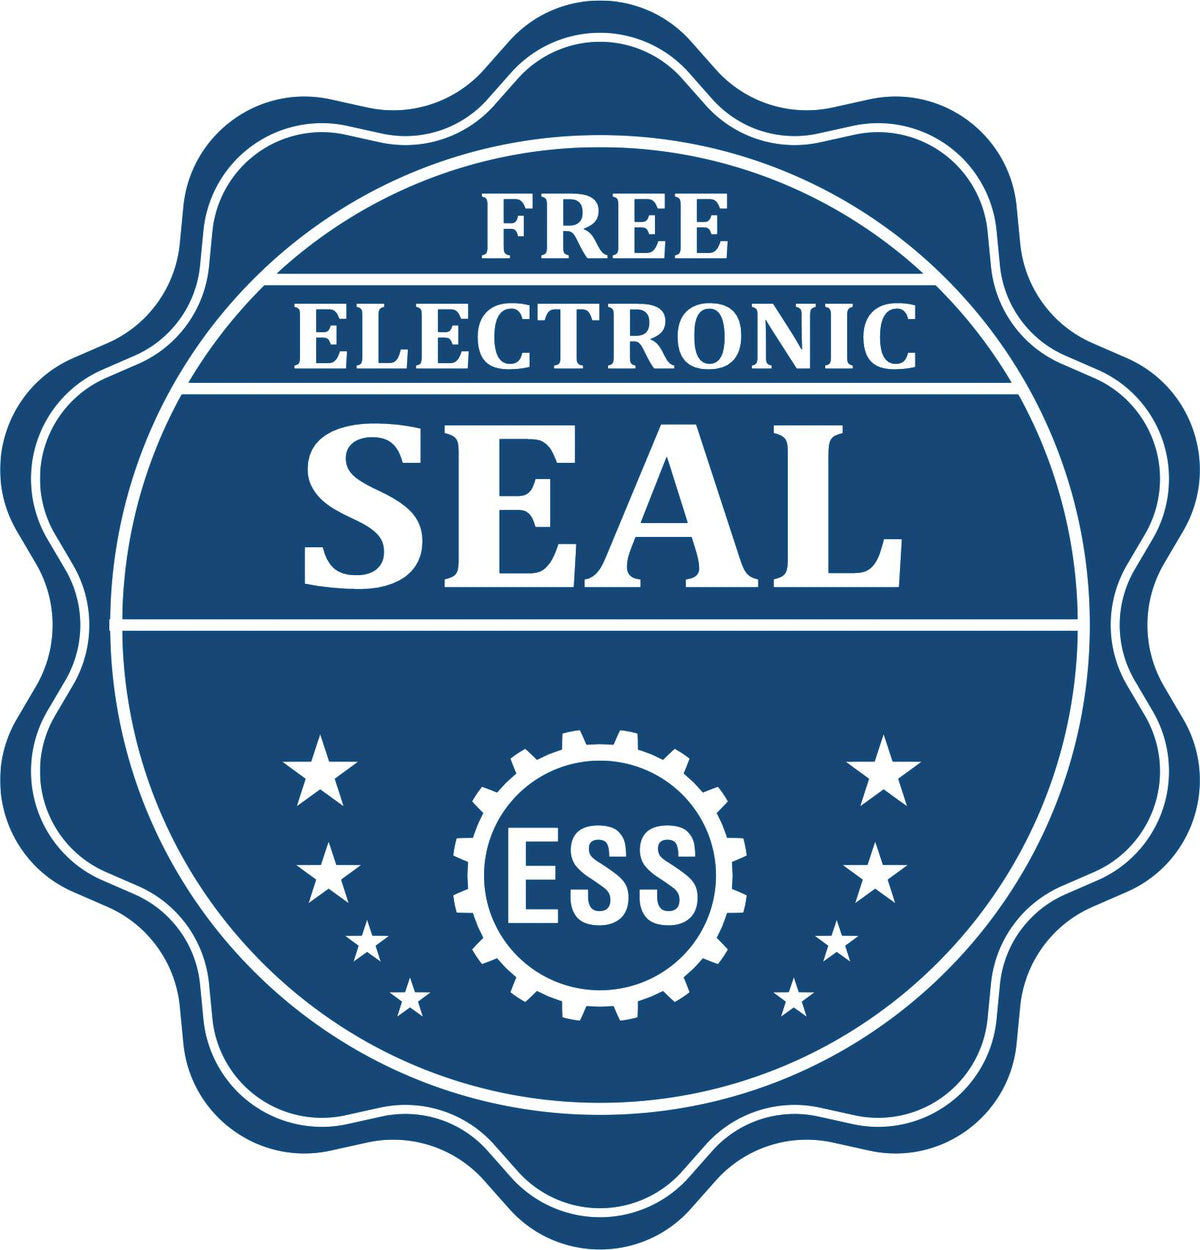 A badge showing a free electronic seal for the Hybrid Oklahoma Geologist Seal with stars and the ESS gear on the emblem.